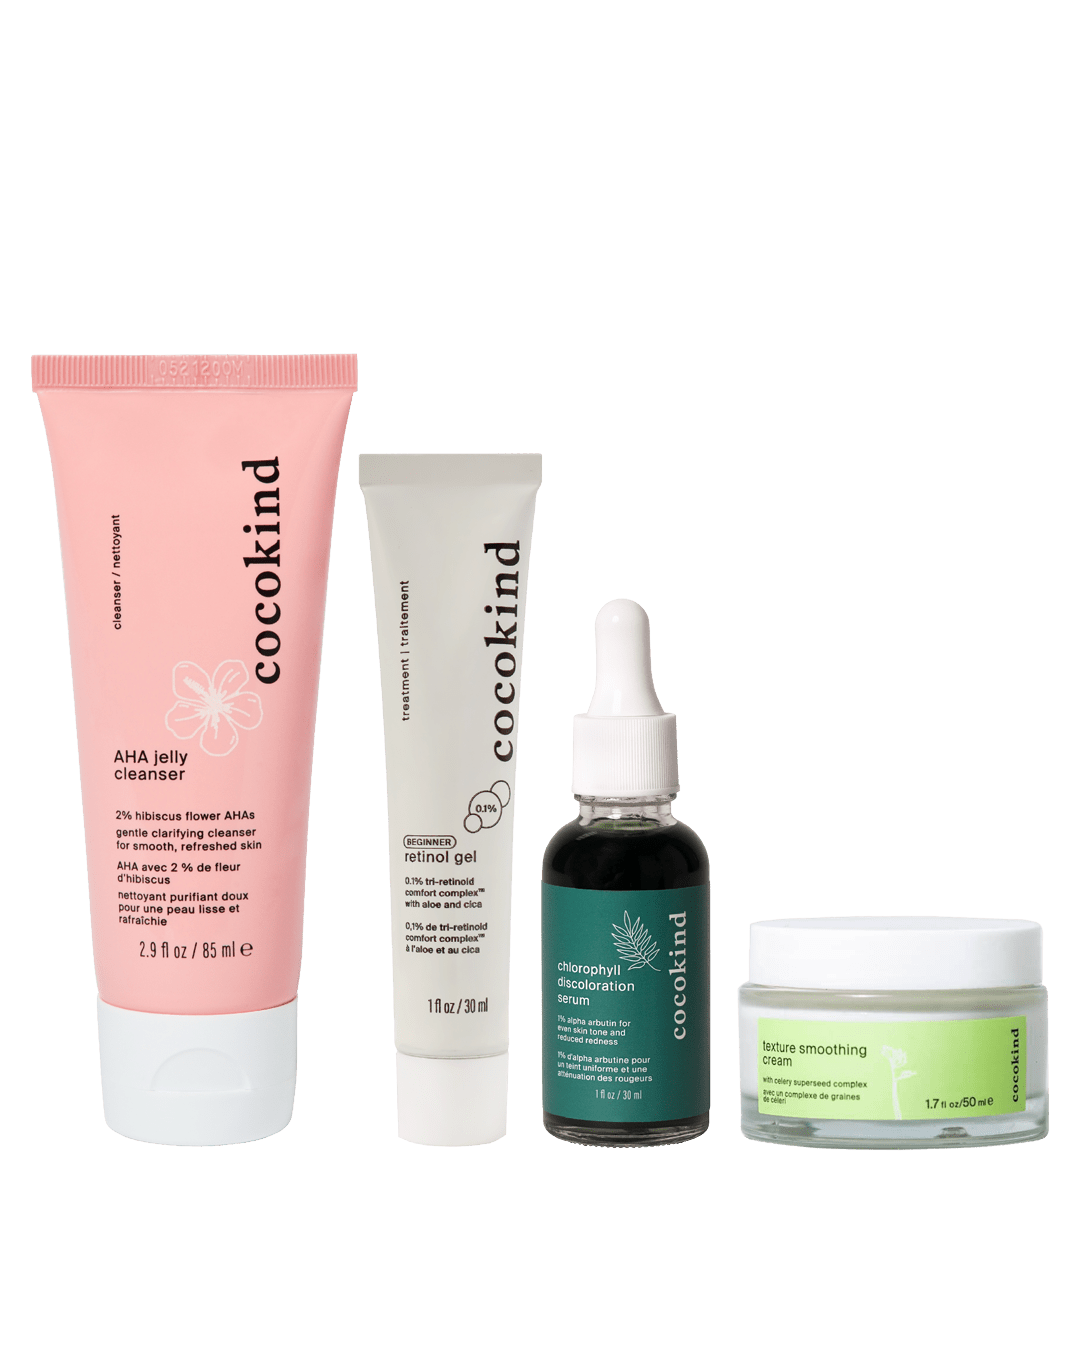 discoloration correcting routine